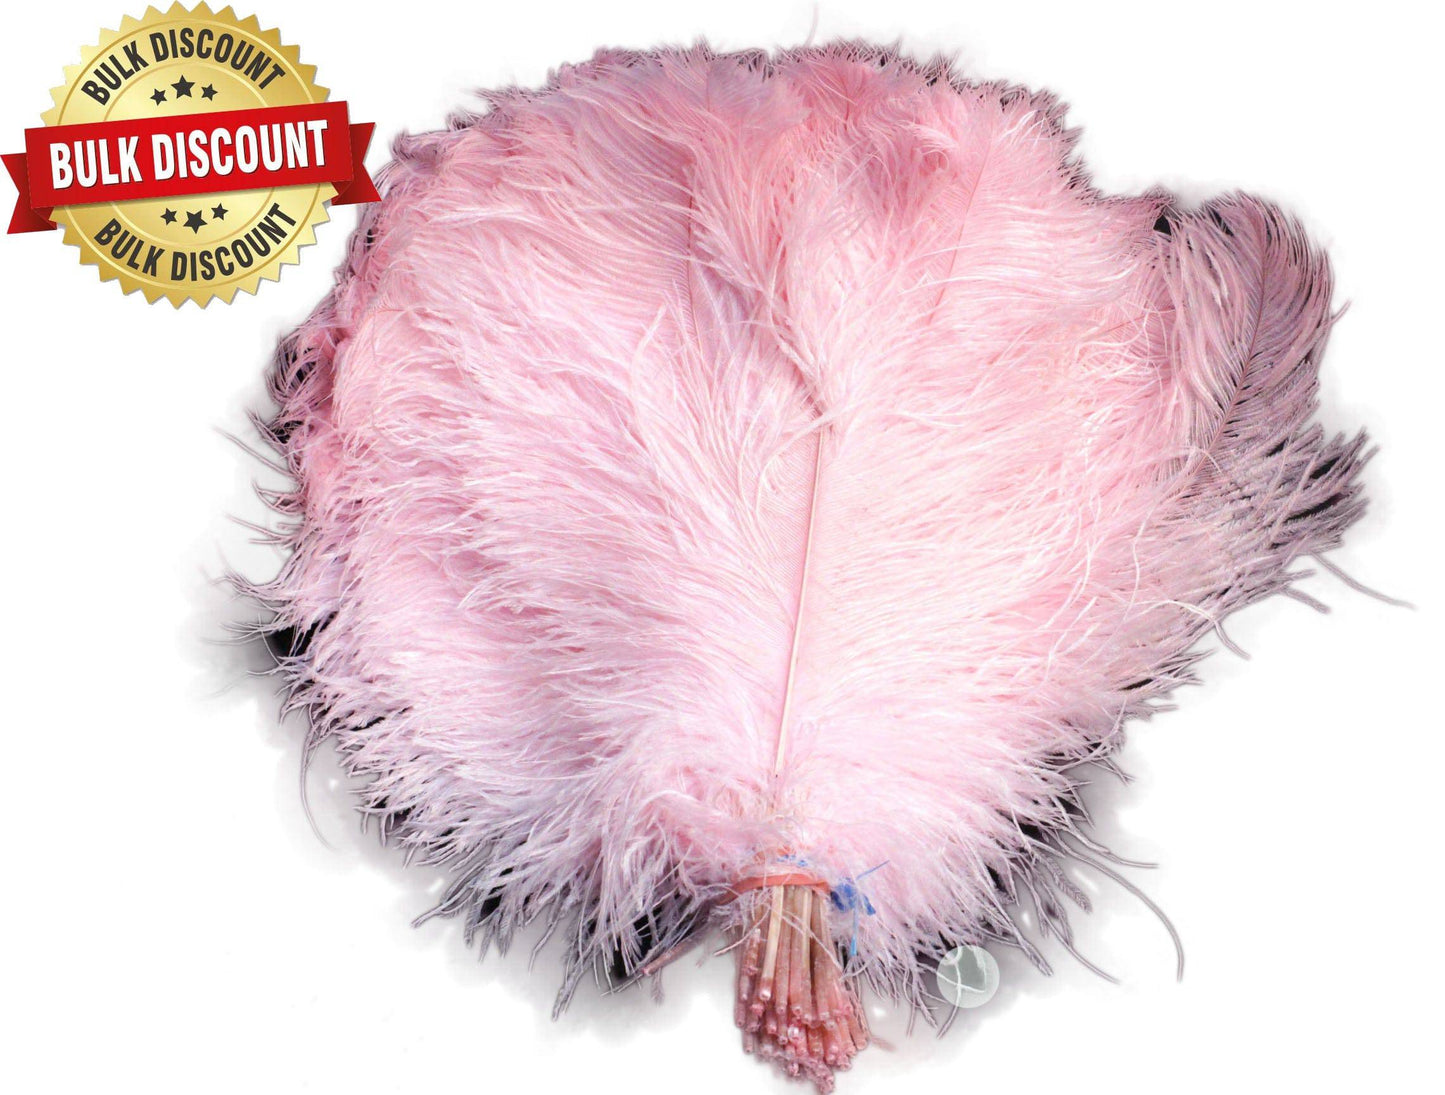 BULK 1/2lb Ostrich Feather Tail Plumes 15-20" (Baby Pink) - Buy Ostrich Feathers